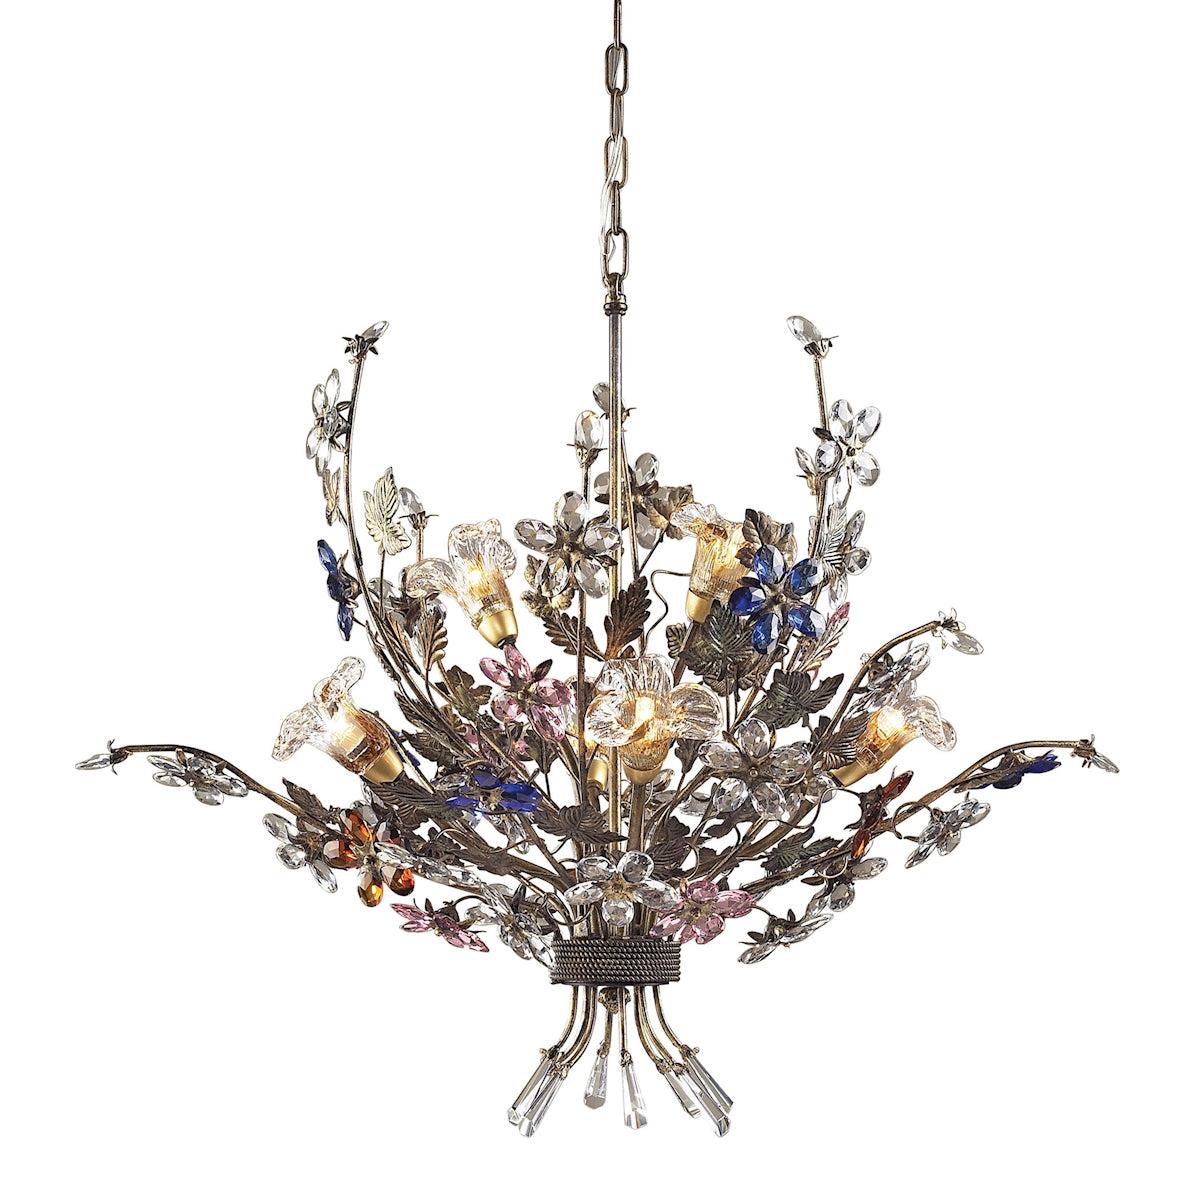 ELK Lighting 9107/4+2 Brillare 6-Light Chandelier in Bronzed Rust with Multi-colored Floral Crystals